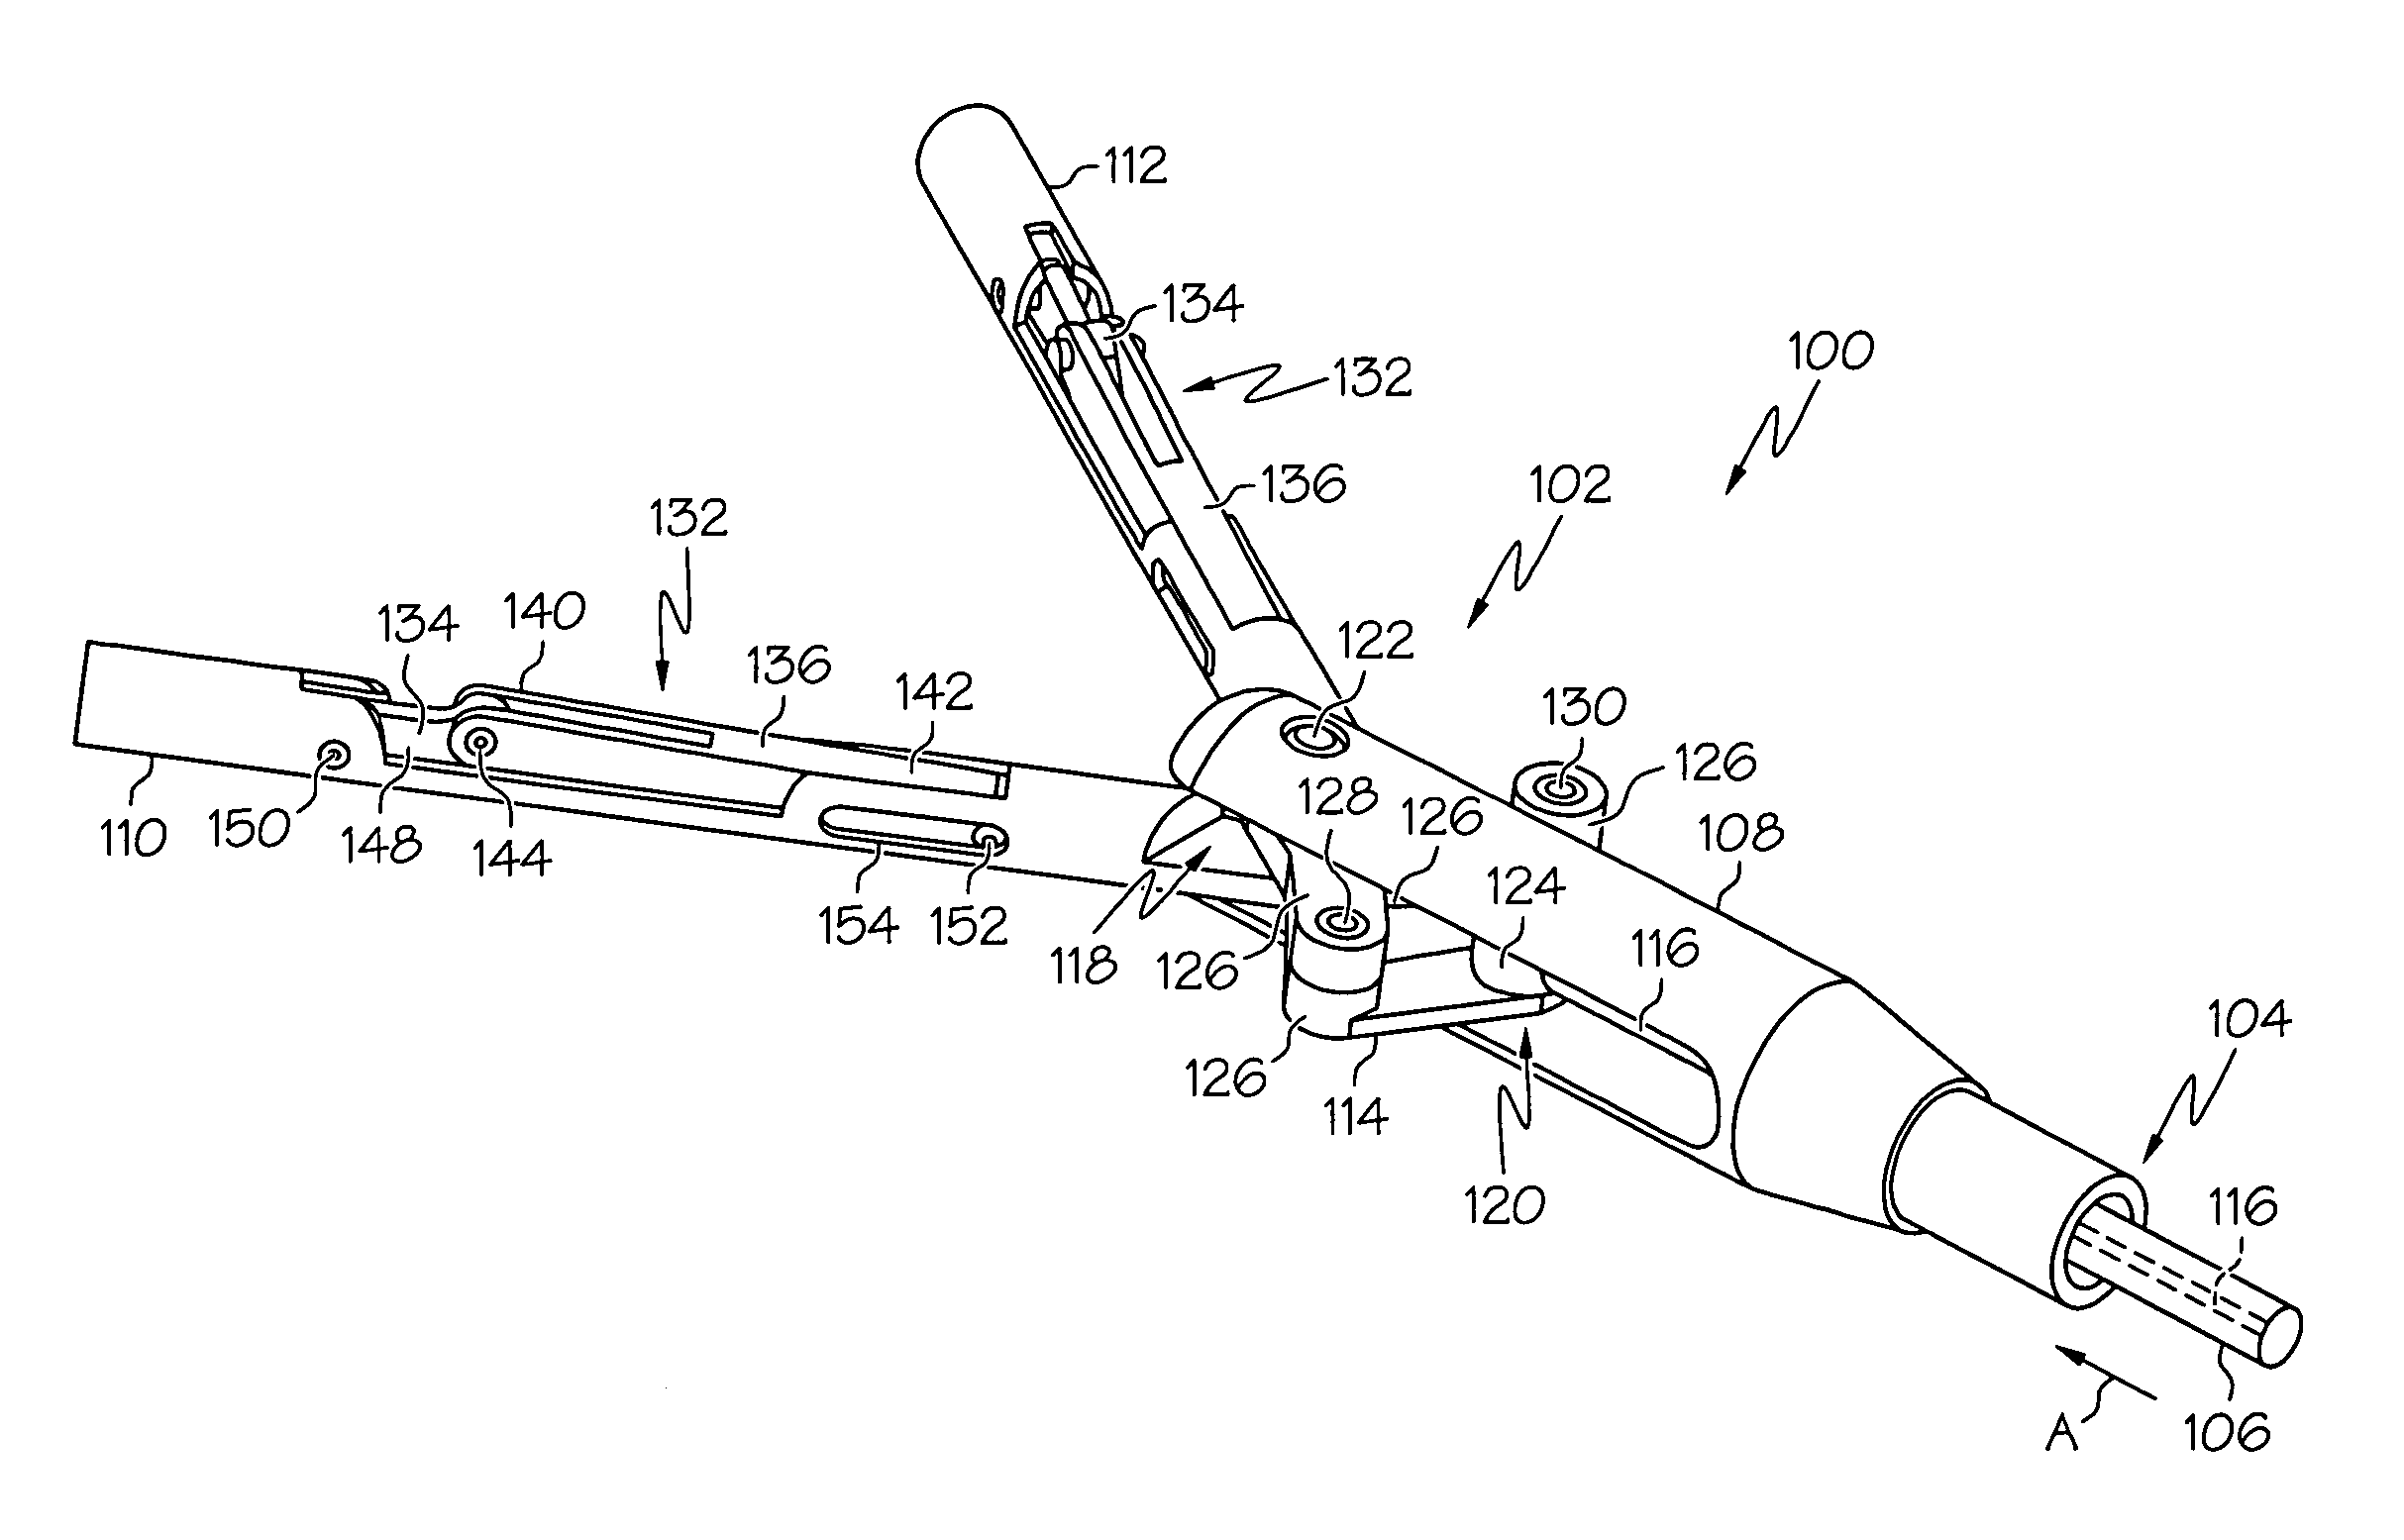 Apparatus and method for performing an endoscopic mucosal resection